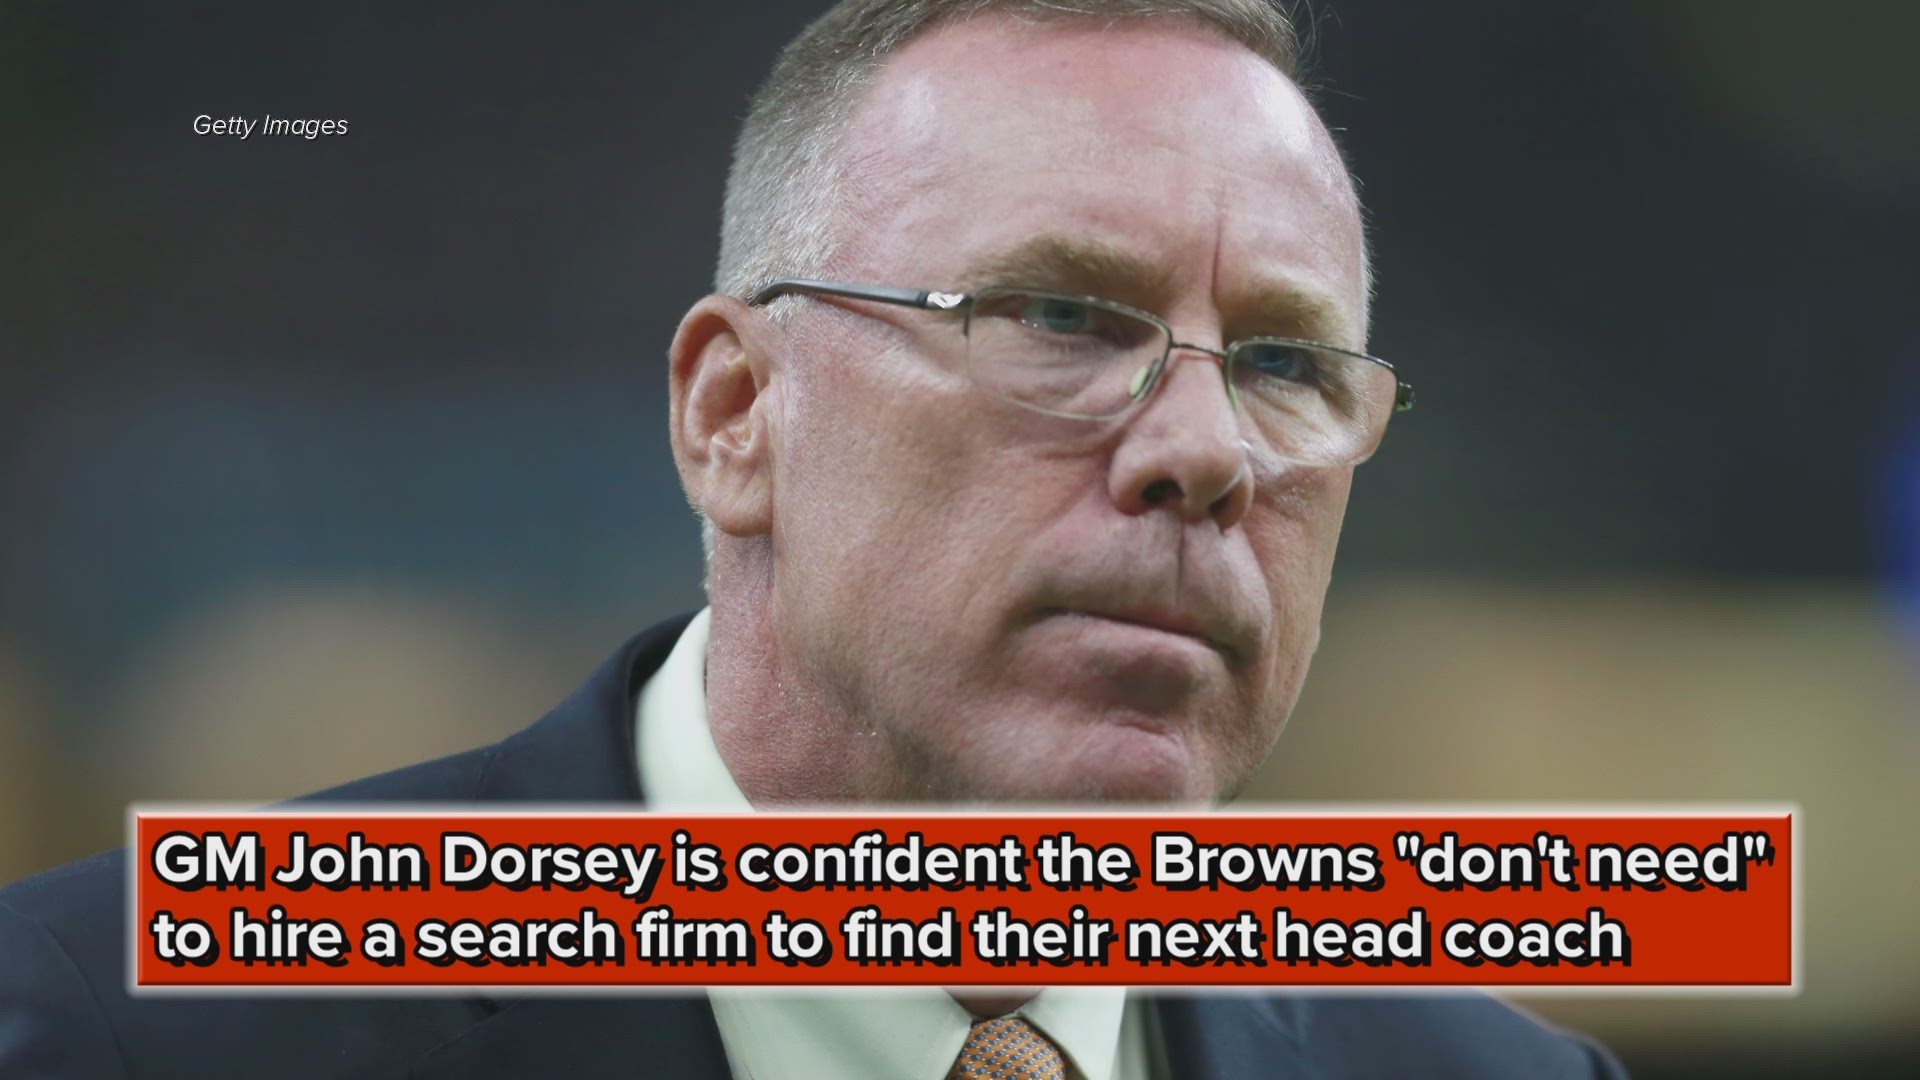 John Dorsey: Cleveland Browns 'don't need' search firm, want 'man of character with football acumen'